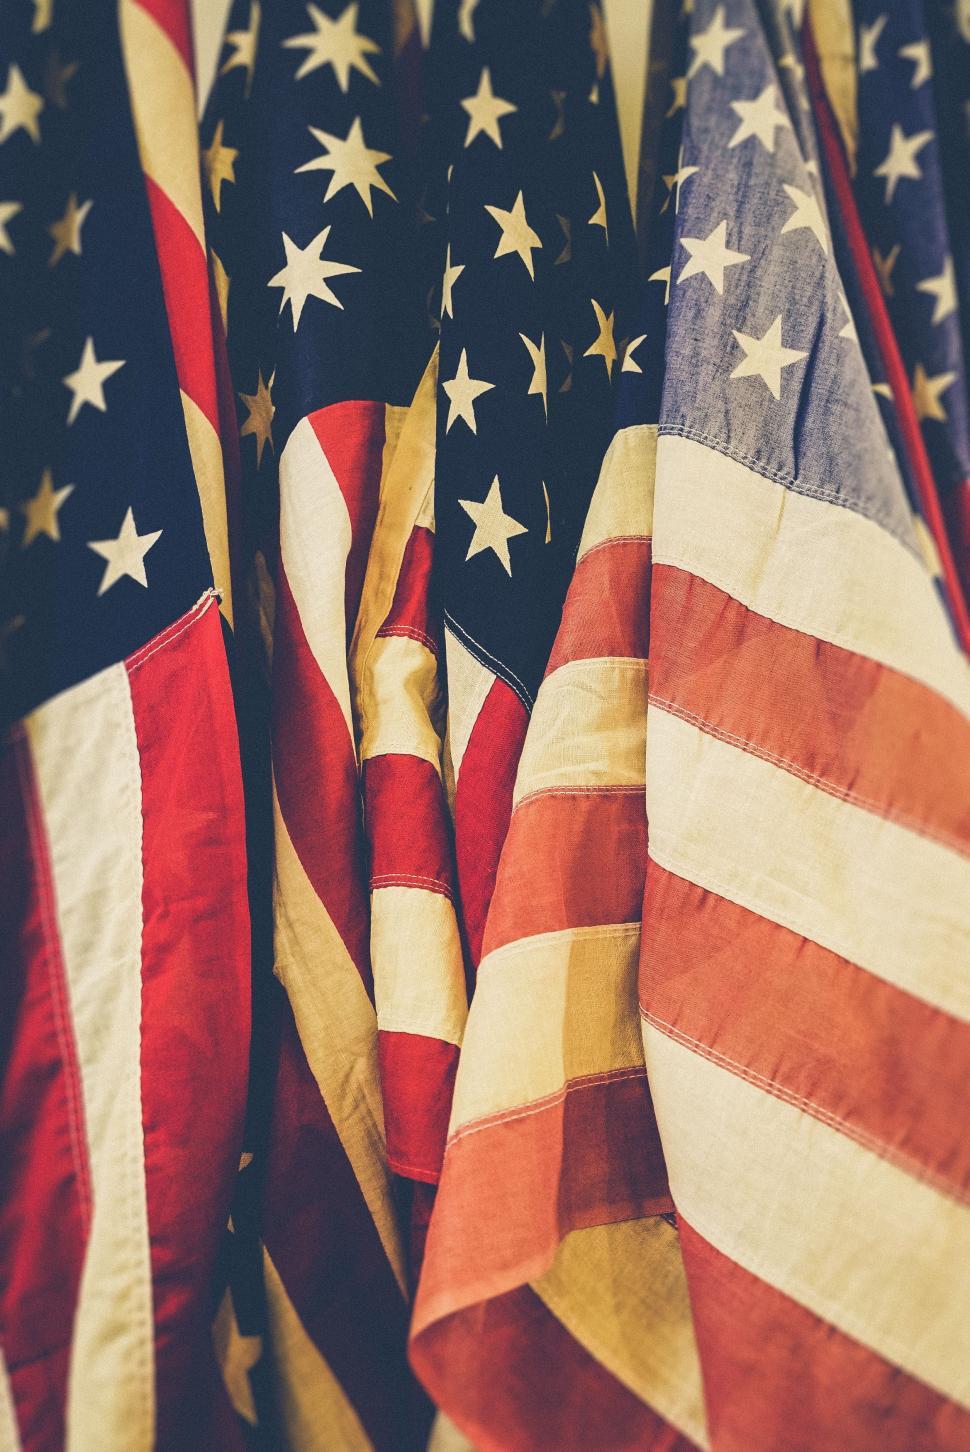 Free Image of American Flags Hanging From a Wall 